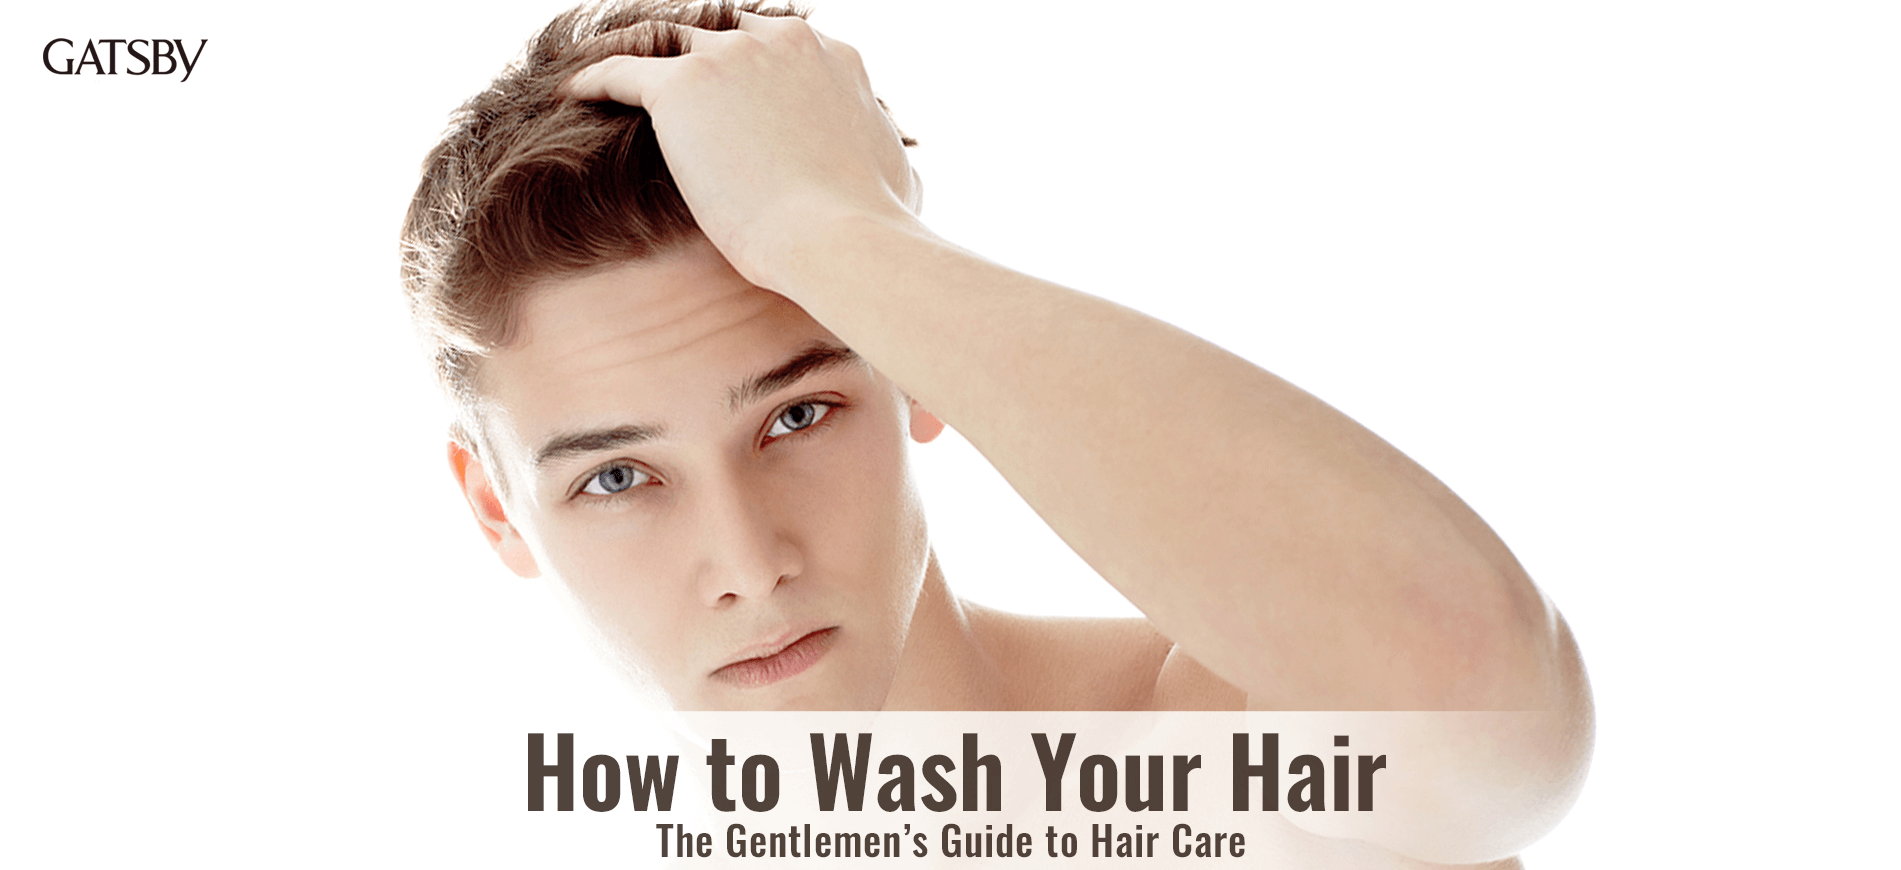 Towel-Drying Your Hair? Here are some do's and don'ts!